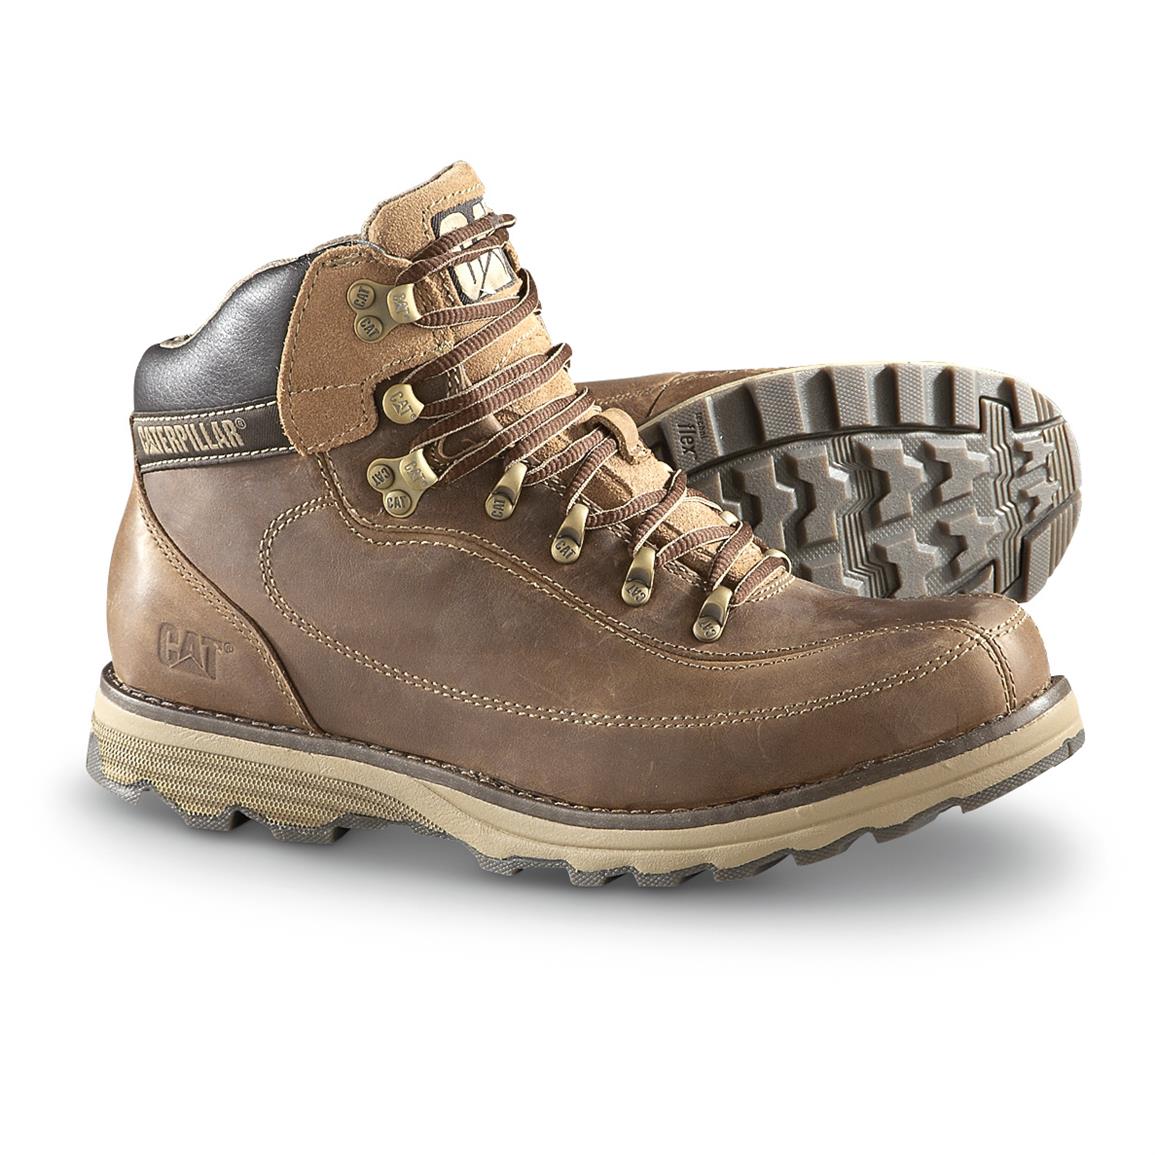 Cat Footwear Highbury Boots - 641055, Work Boots at Sportsman's Guide